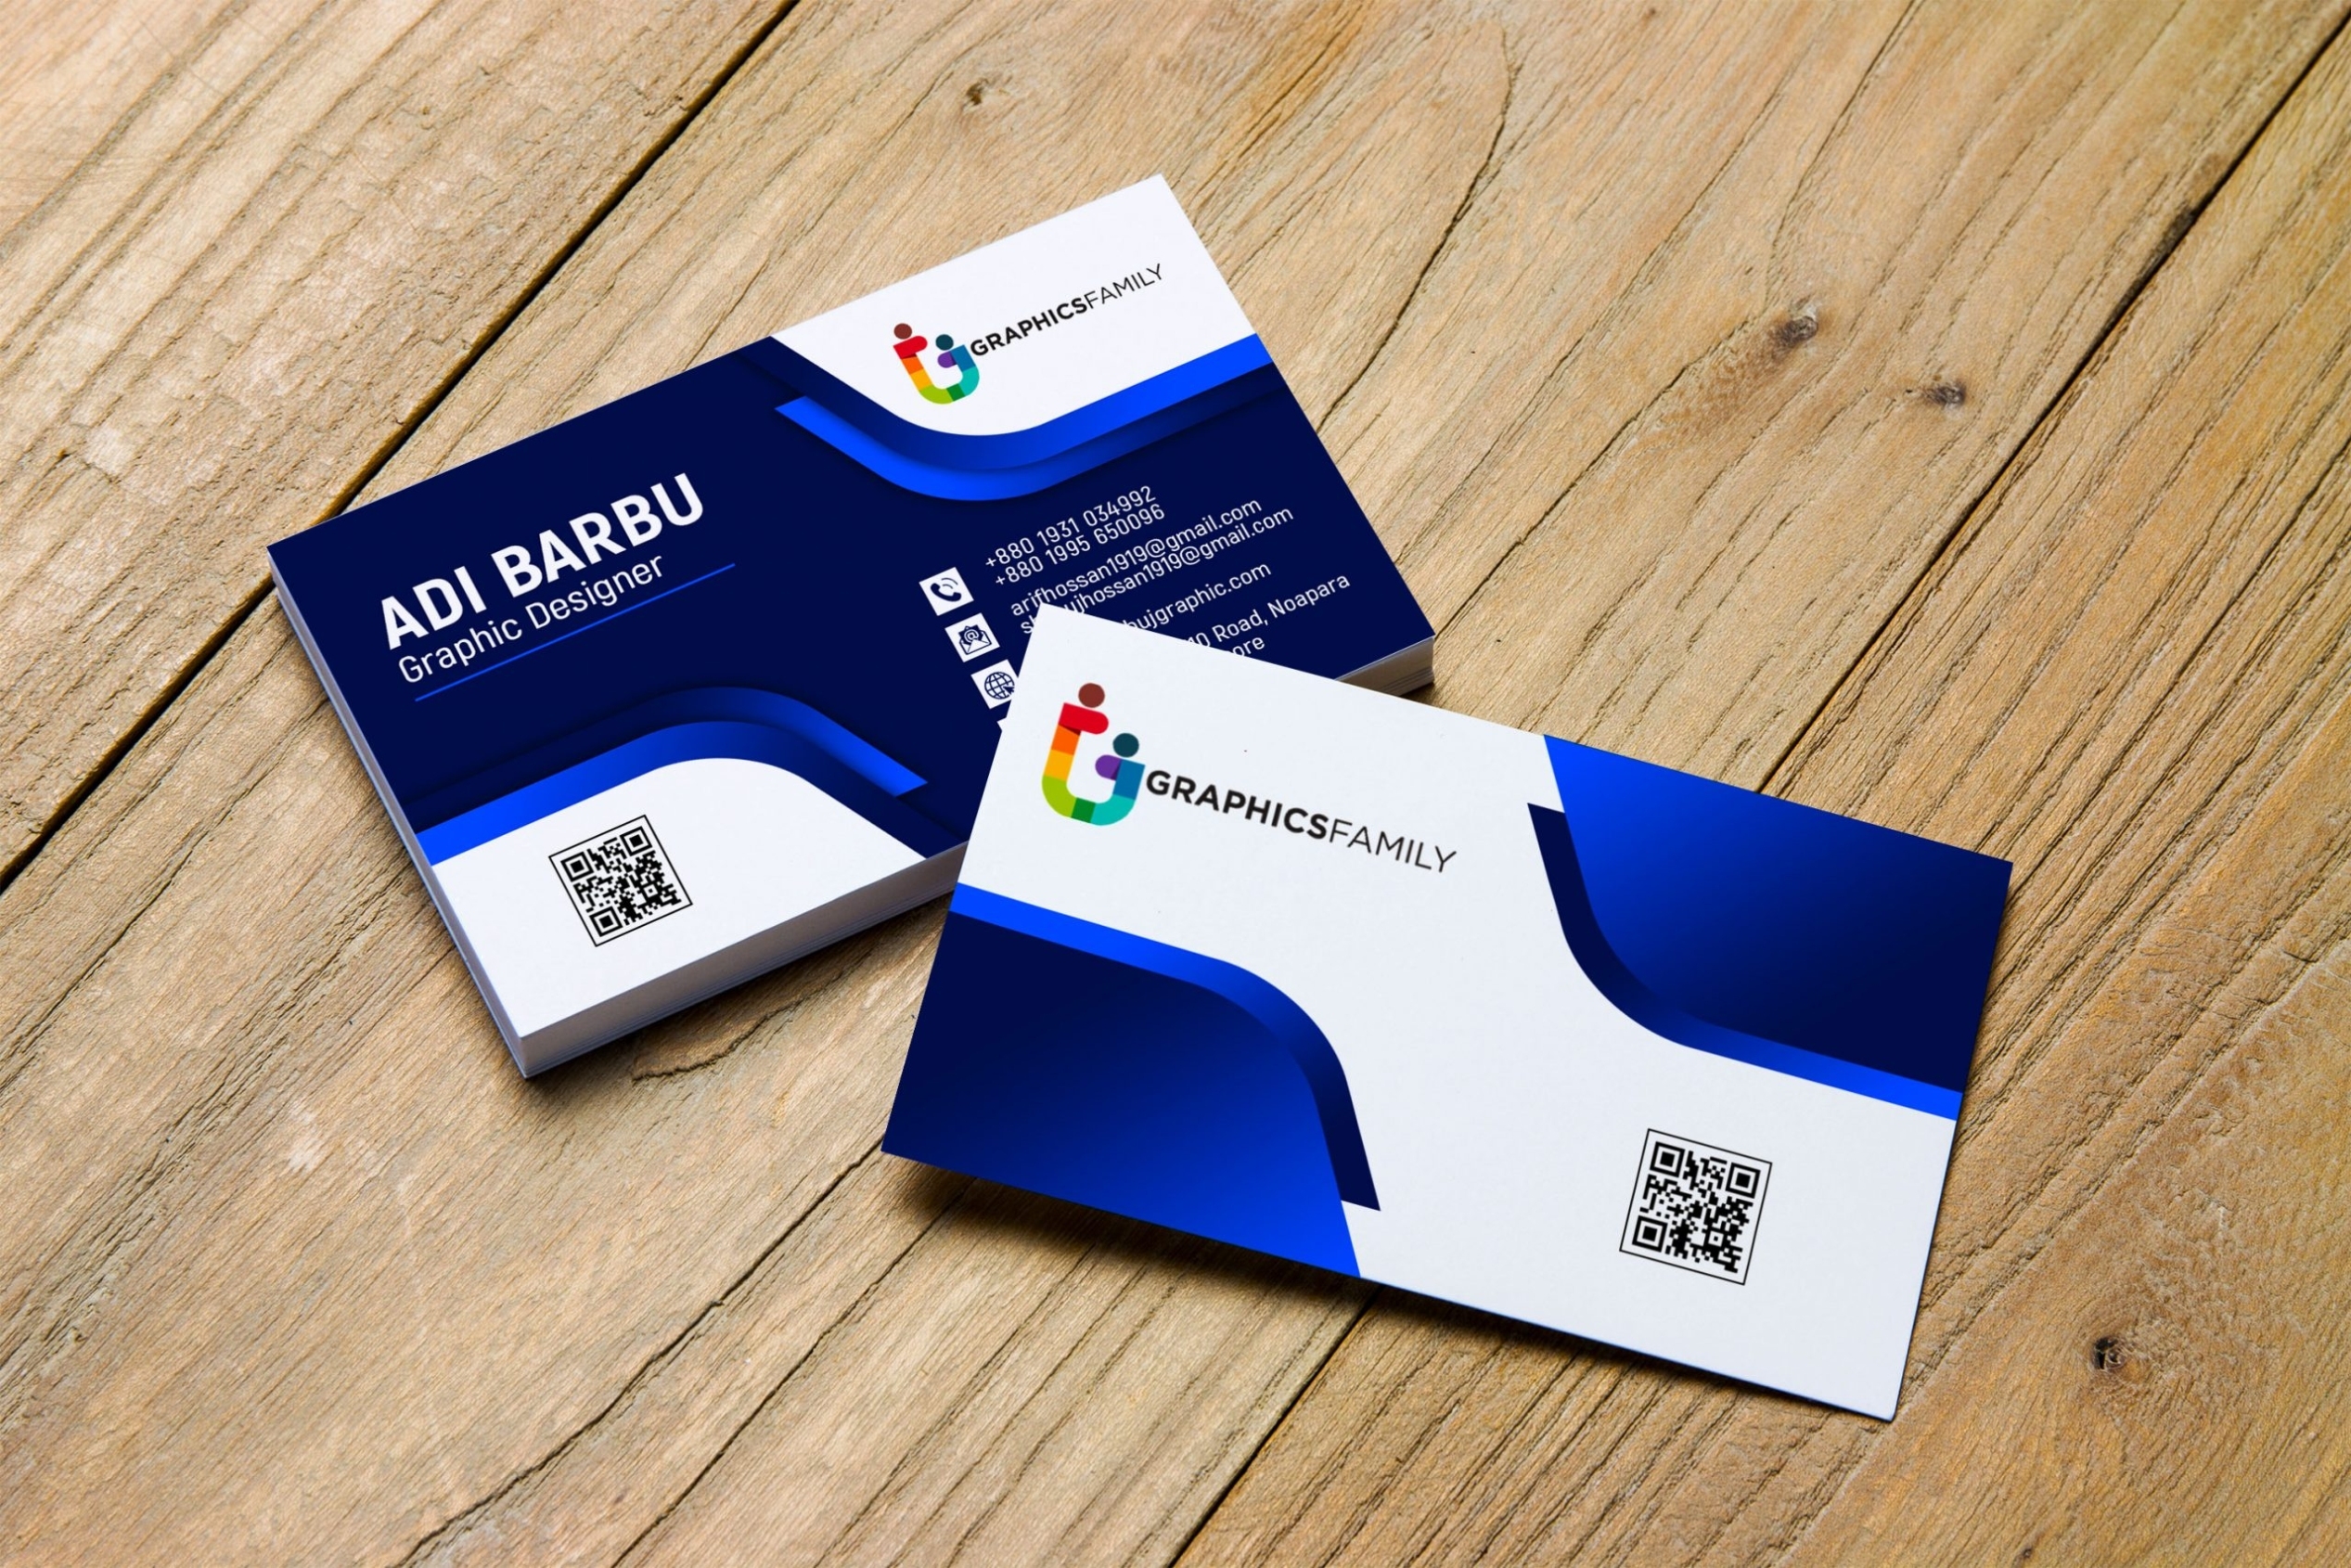 Professional Business Card Design Free Psd Download - Graphicsfamily within Templates For Visiting Cards Free Downloads